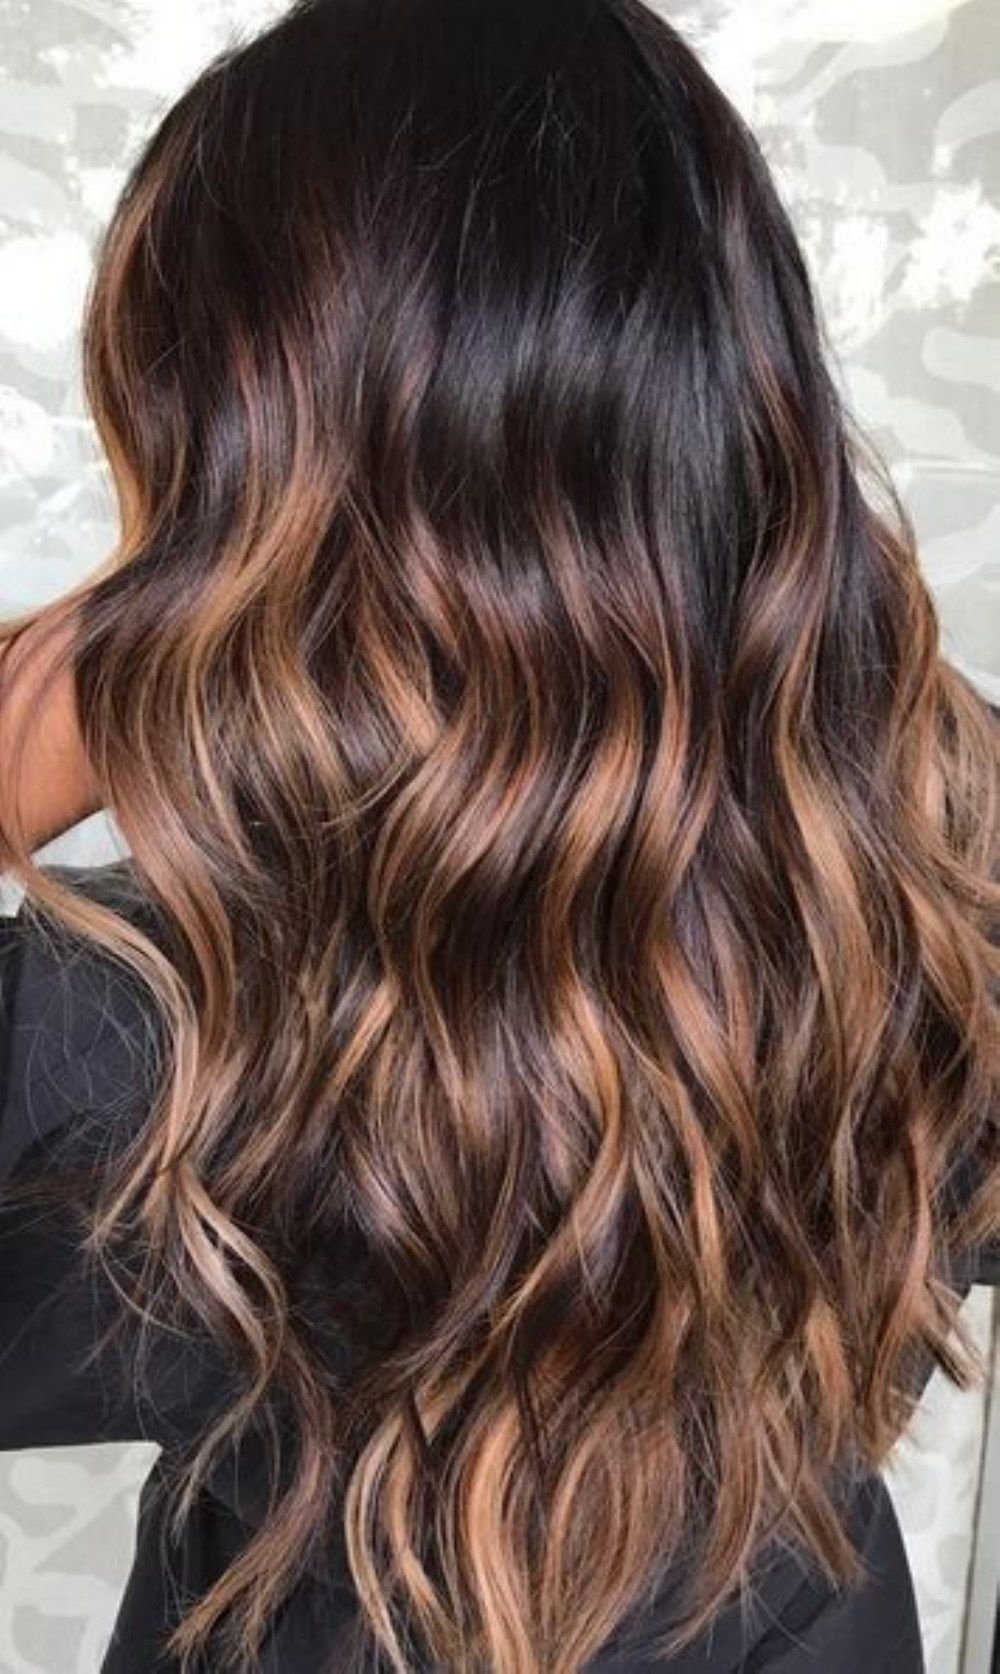 10 Awesome Summer Hair Color Ideas For Brunettes top brunette hair color ideas to try 2017 16 cabelo pinterest 2022